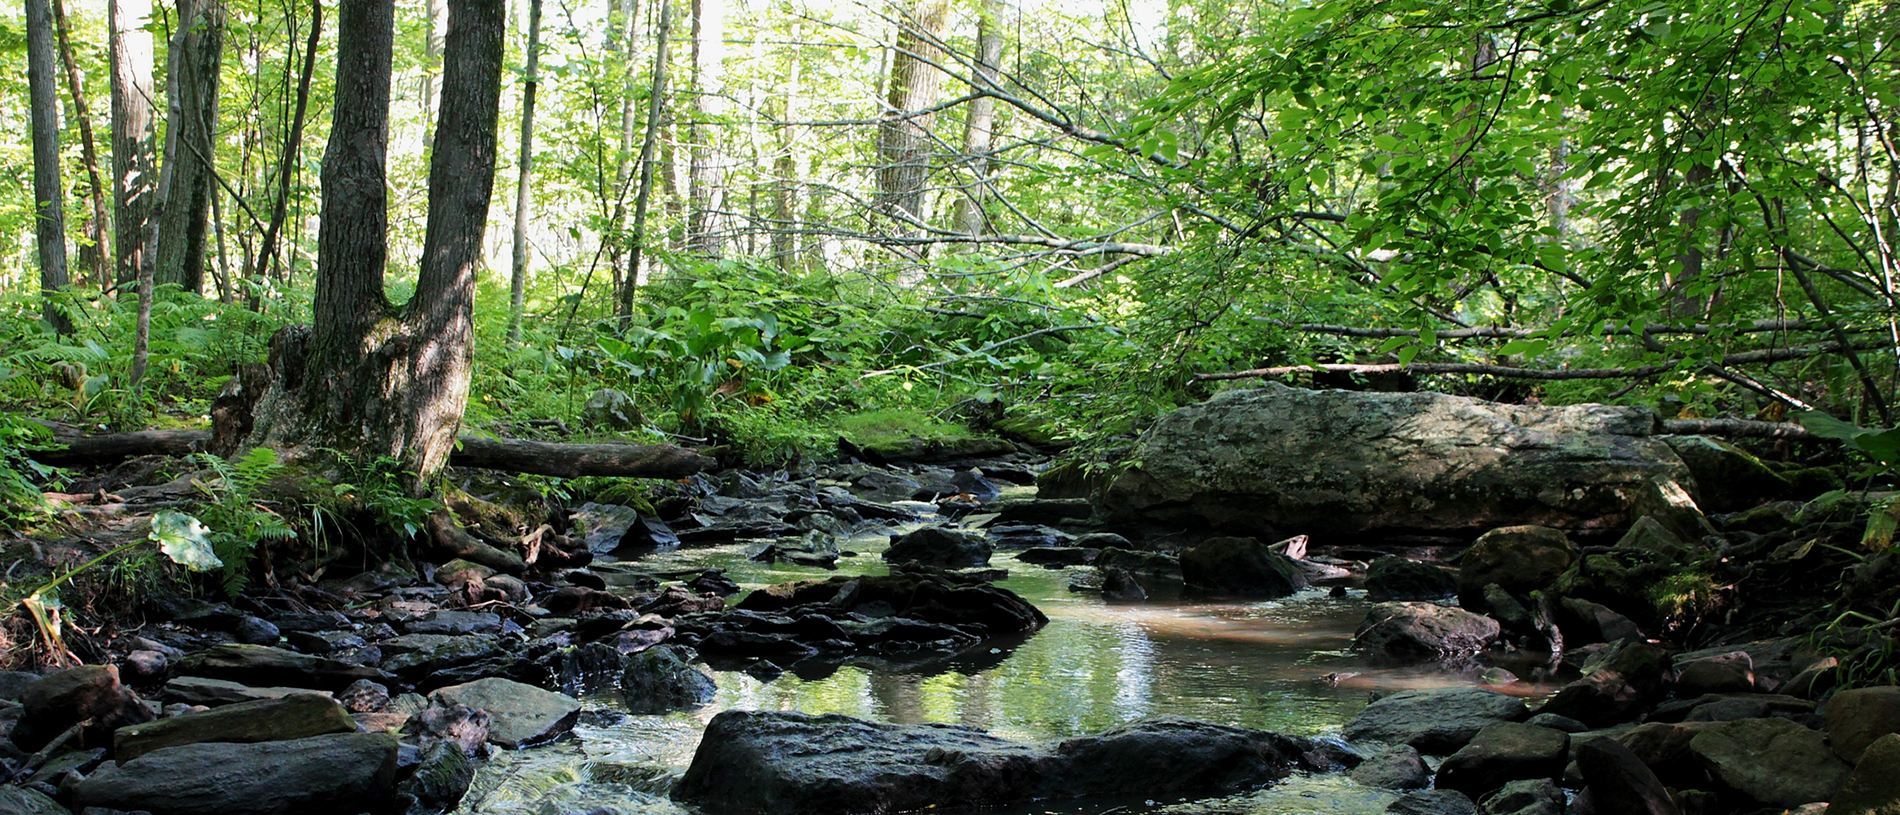 Brook with stones at Broad Meadow Brook